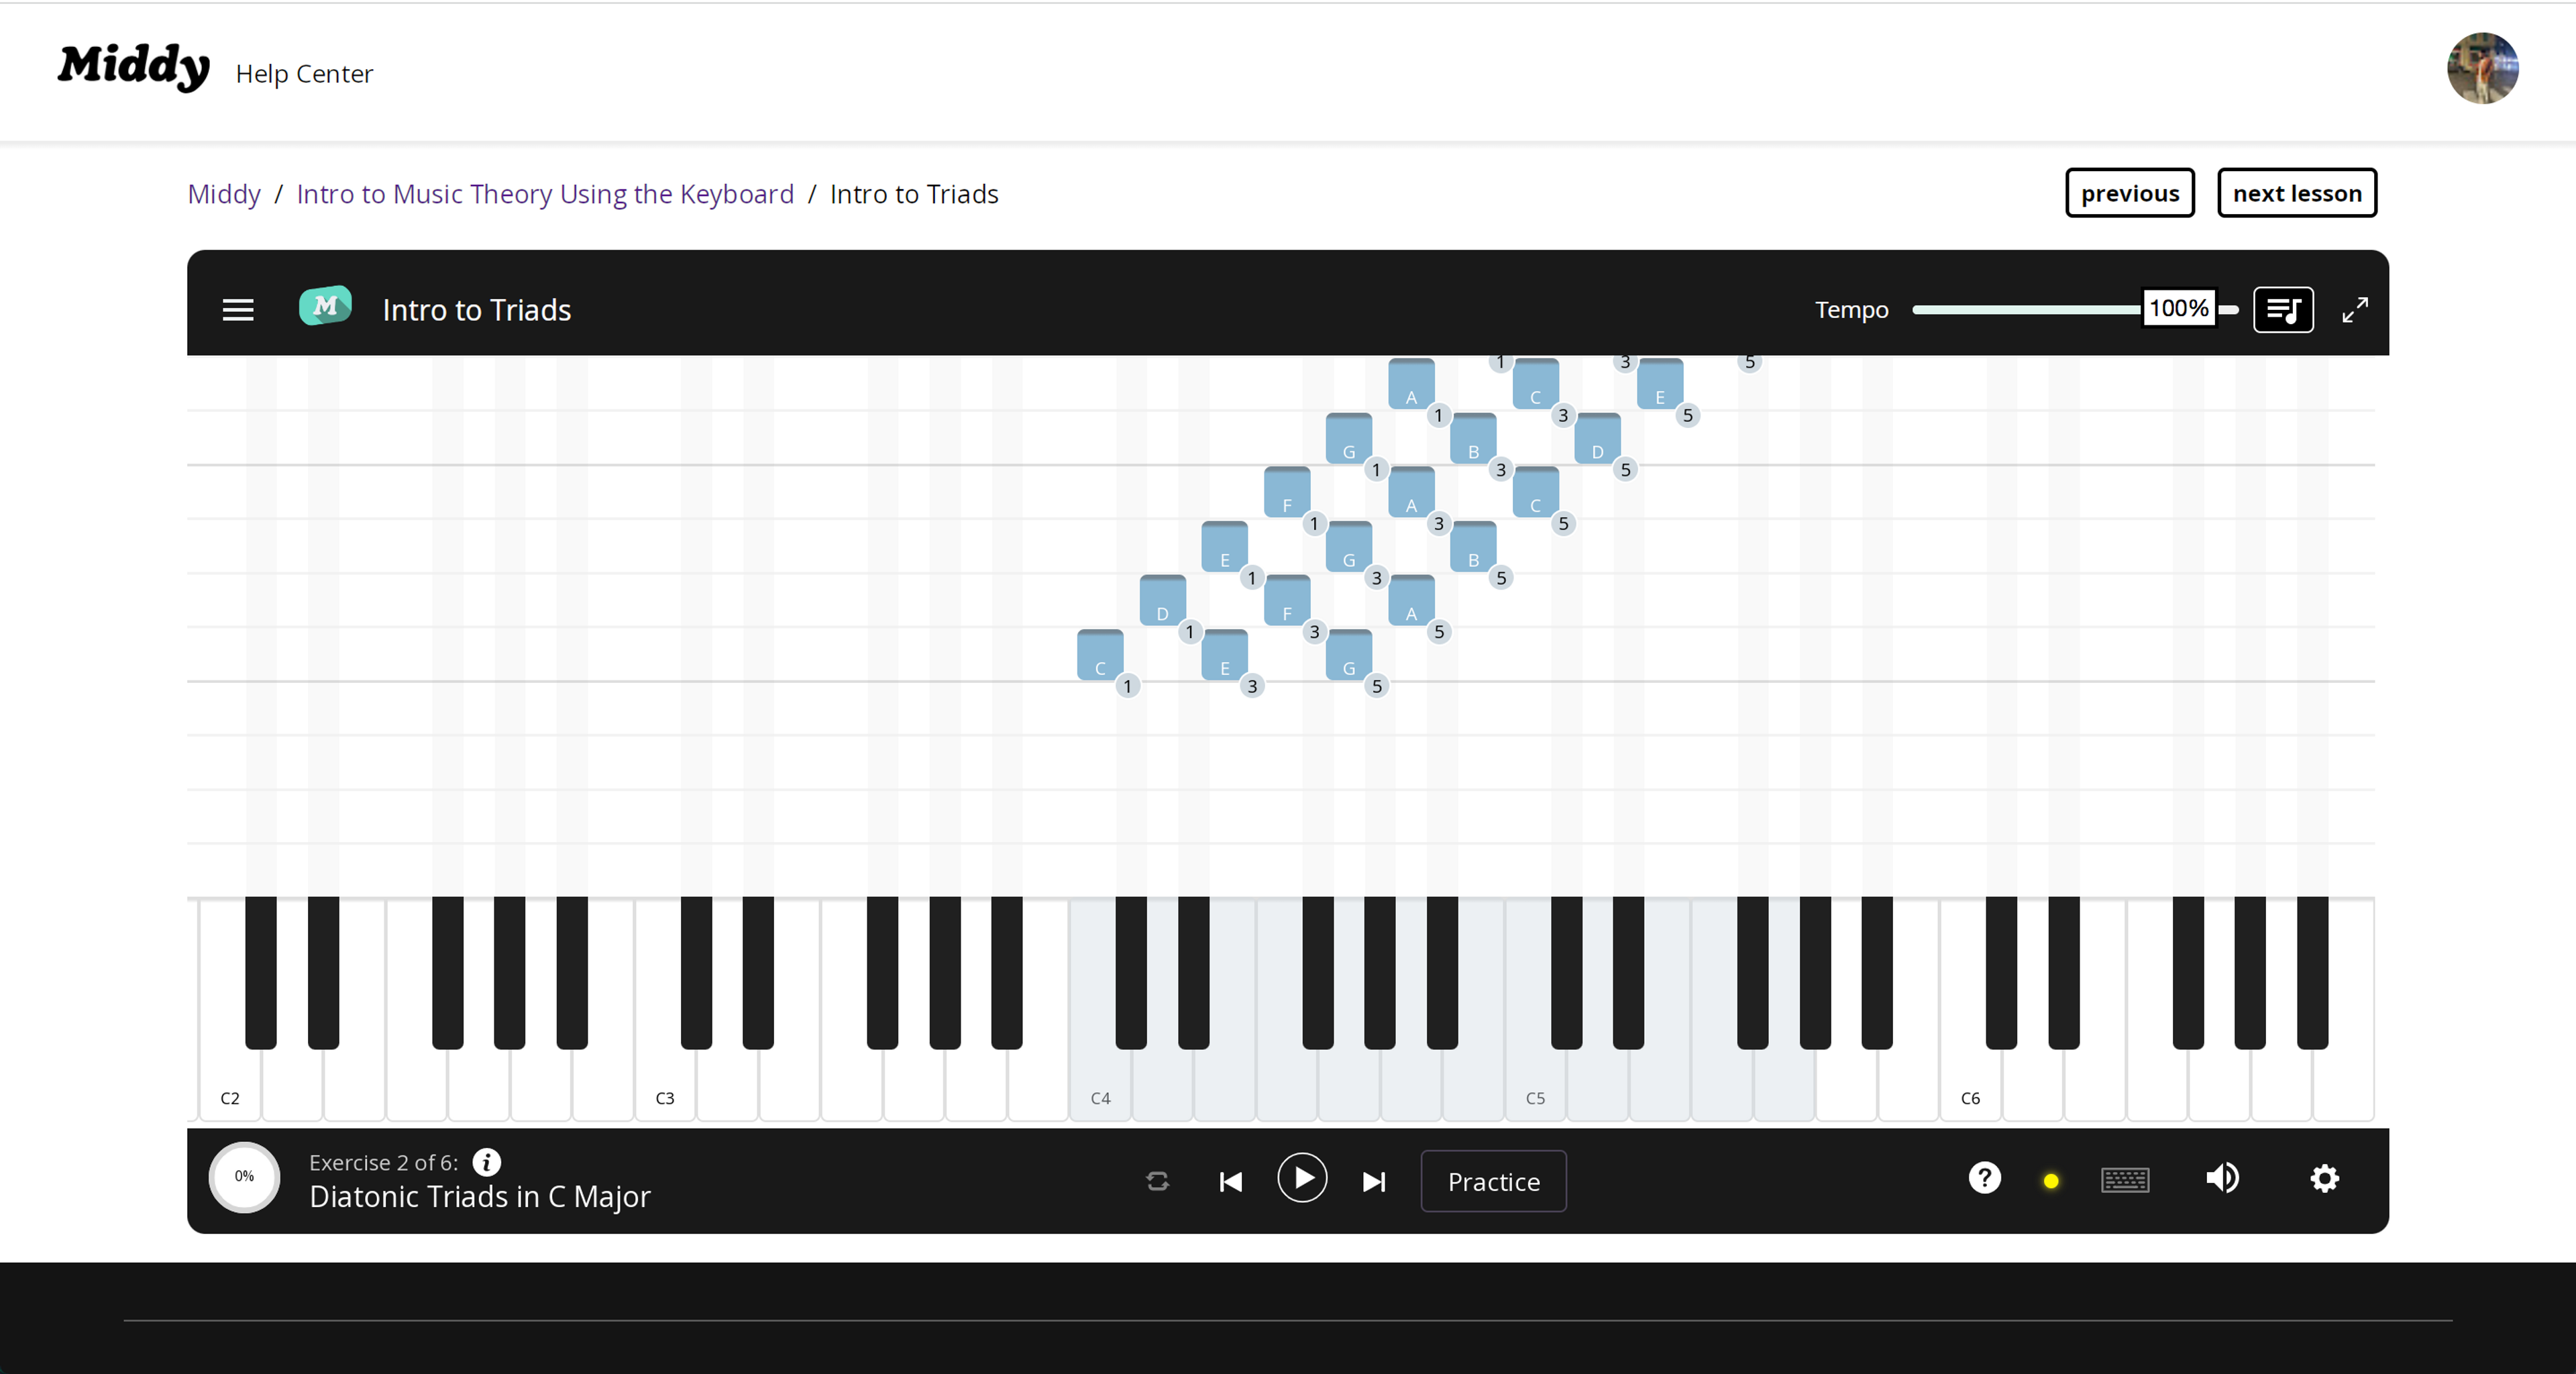 A screenshot of the Middy.com piano learning interface